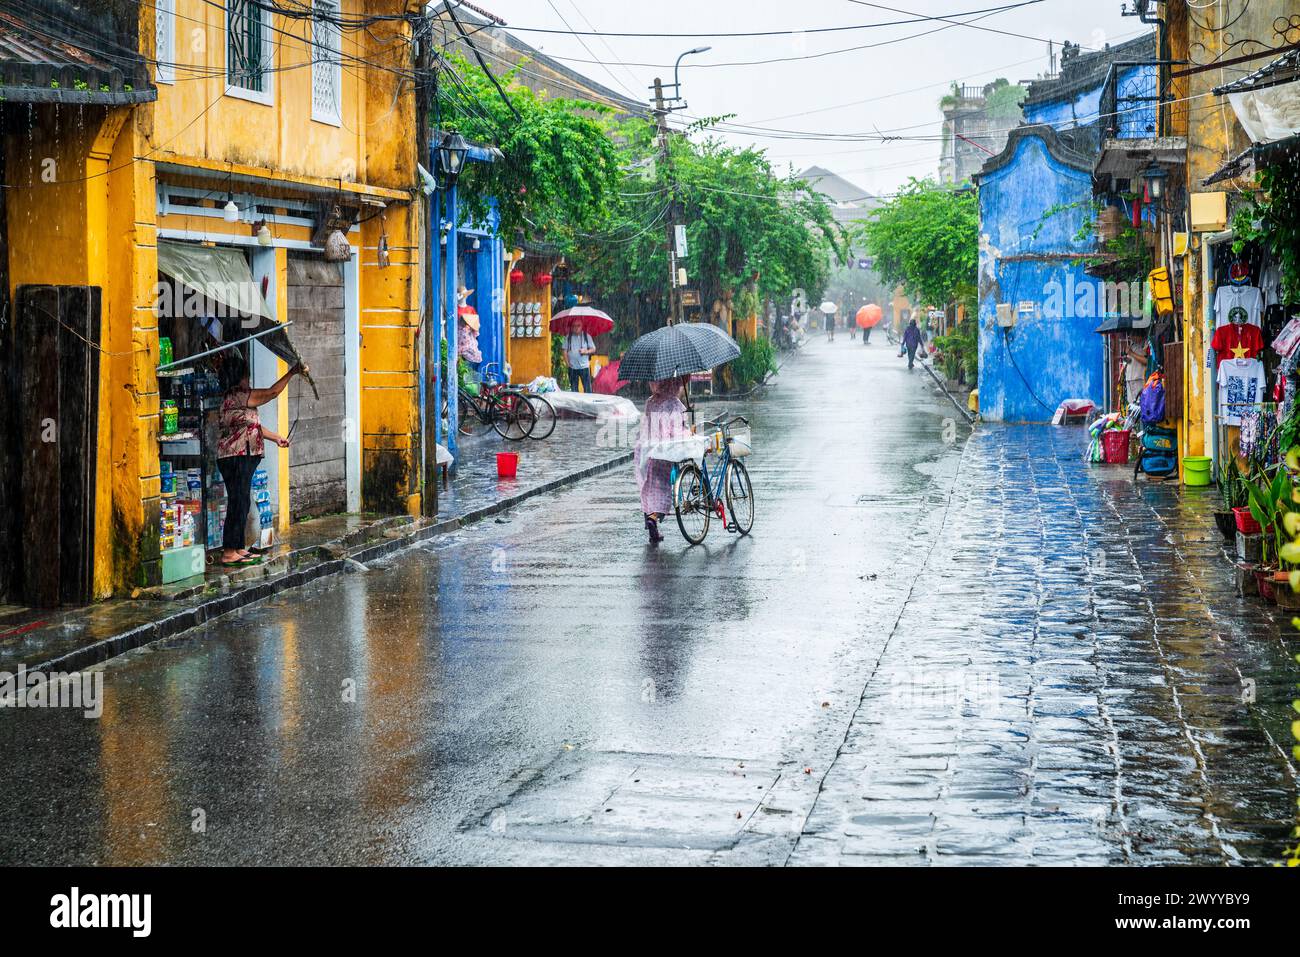 Hoi An, Vietnam, November 21, 2022: Street scene in the old town of Hoi An, Vietnam on a rainy day Stock Photo